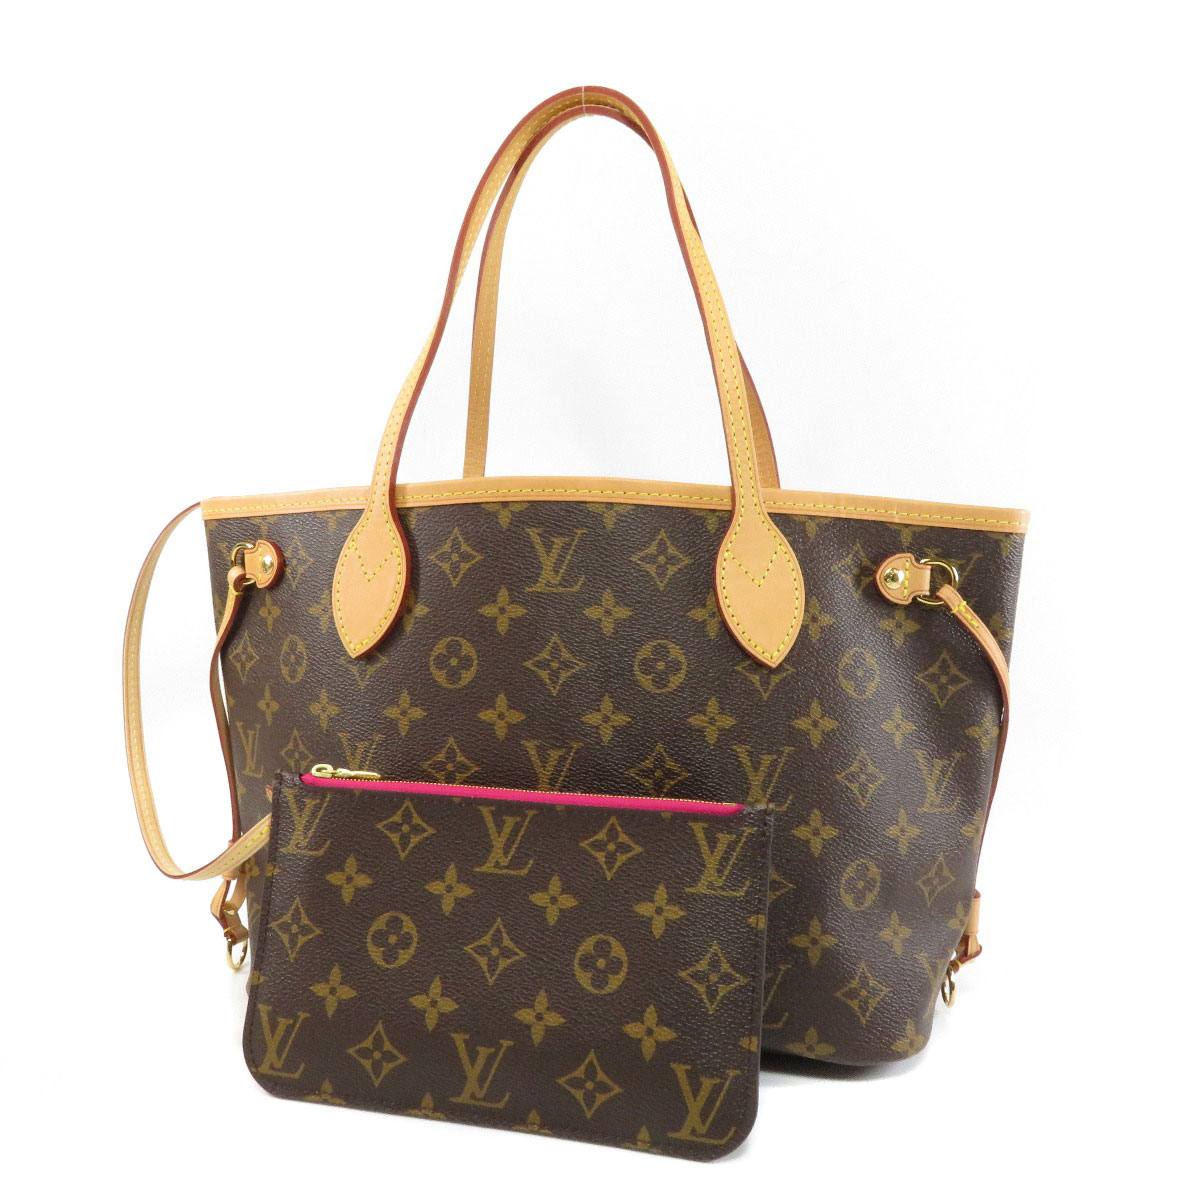 Louis Vuitton M41001 Neverfull PM Tote Bag Ladies ー The best place to buy Brand Bags Watches ...